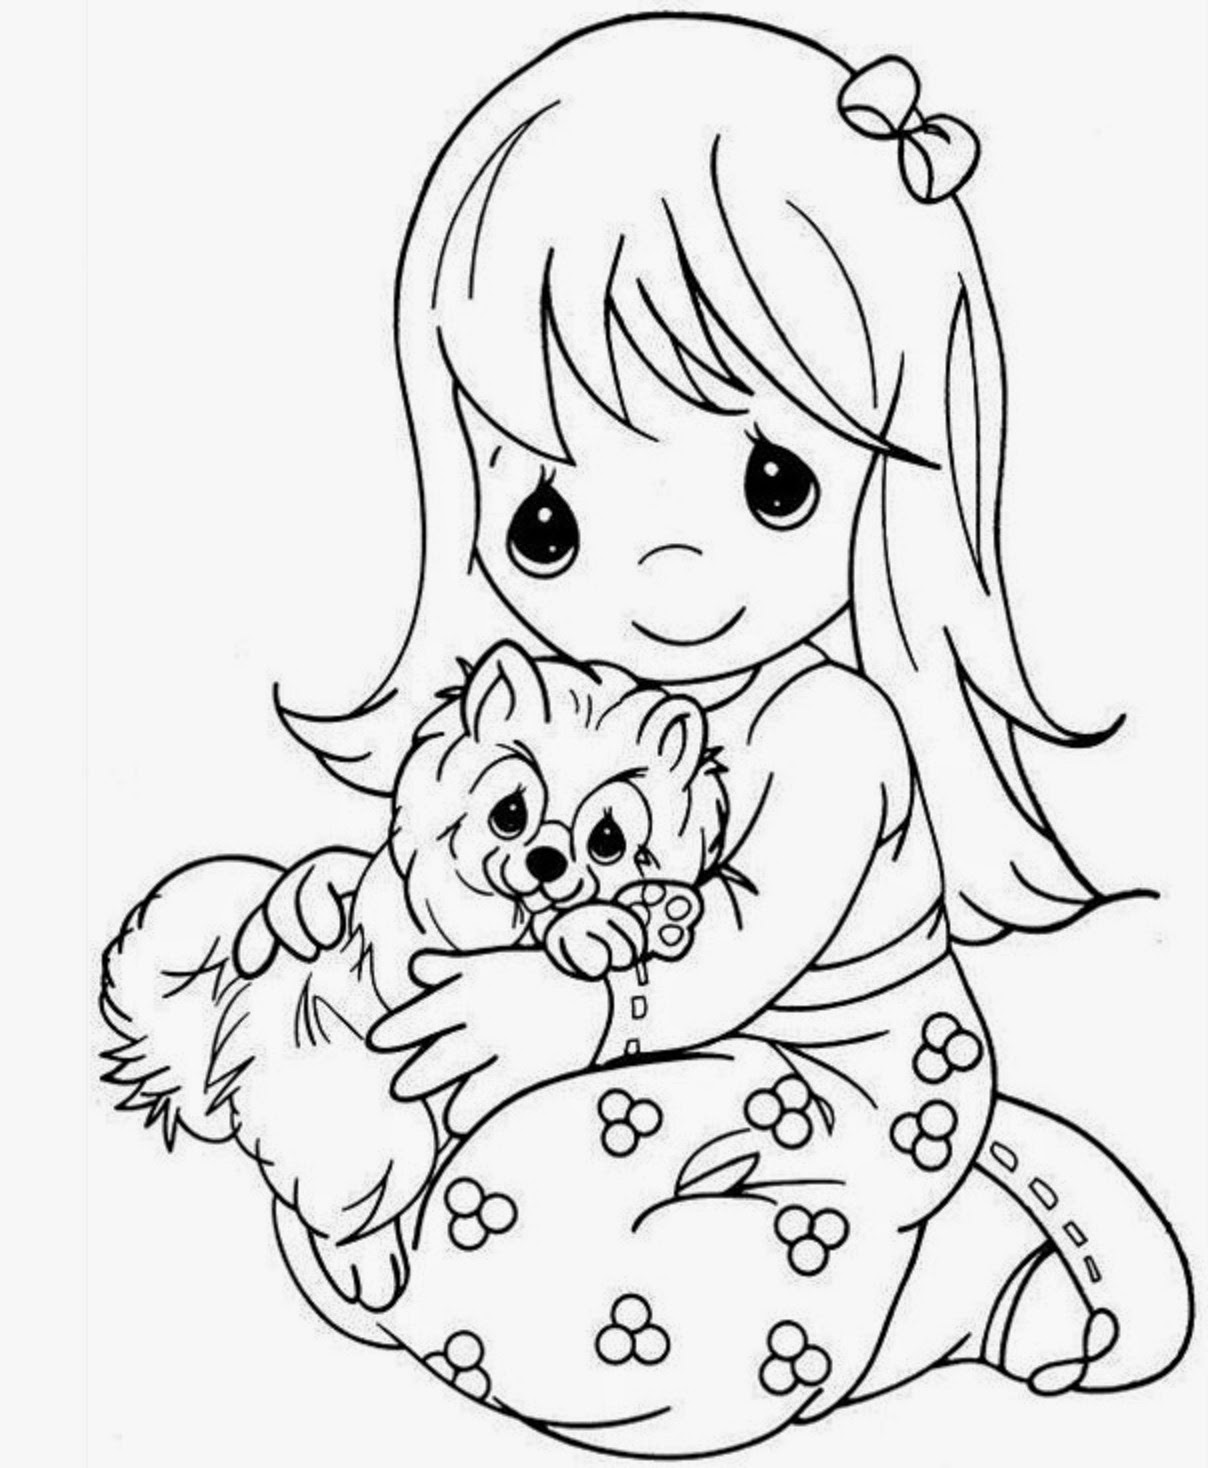  Cartoon Girl Coloring Pages 9